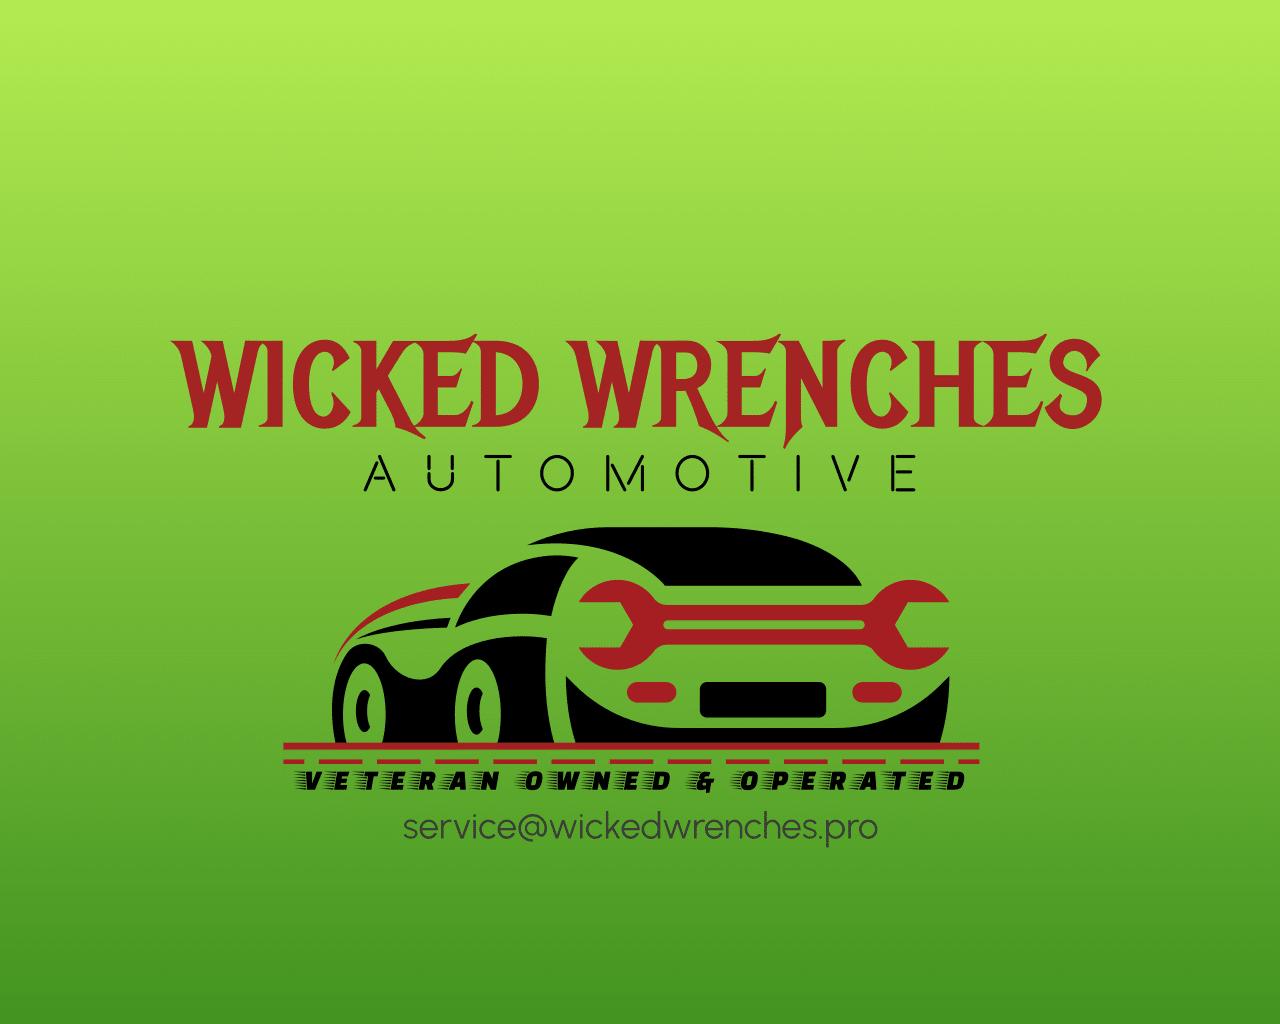 Wicked Wrenches Automotive  Better Business Bureau® Profile